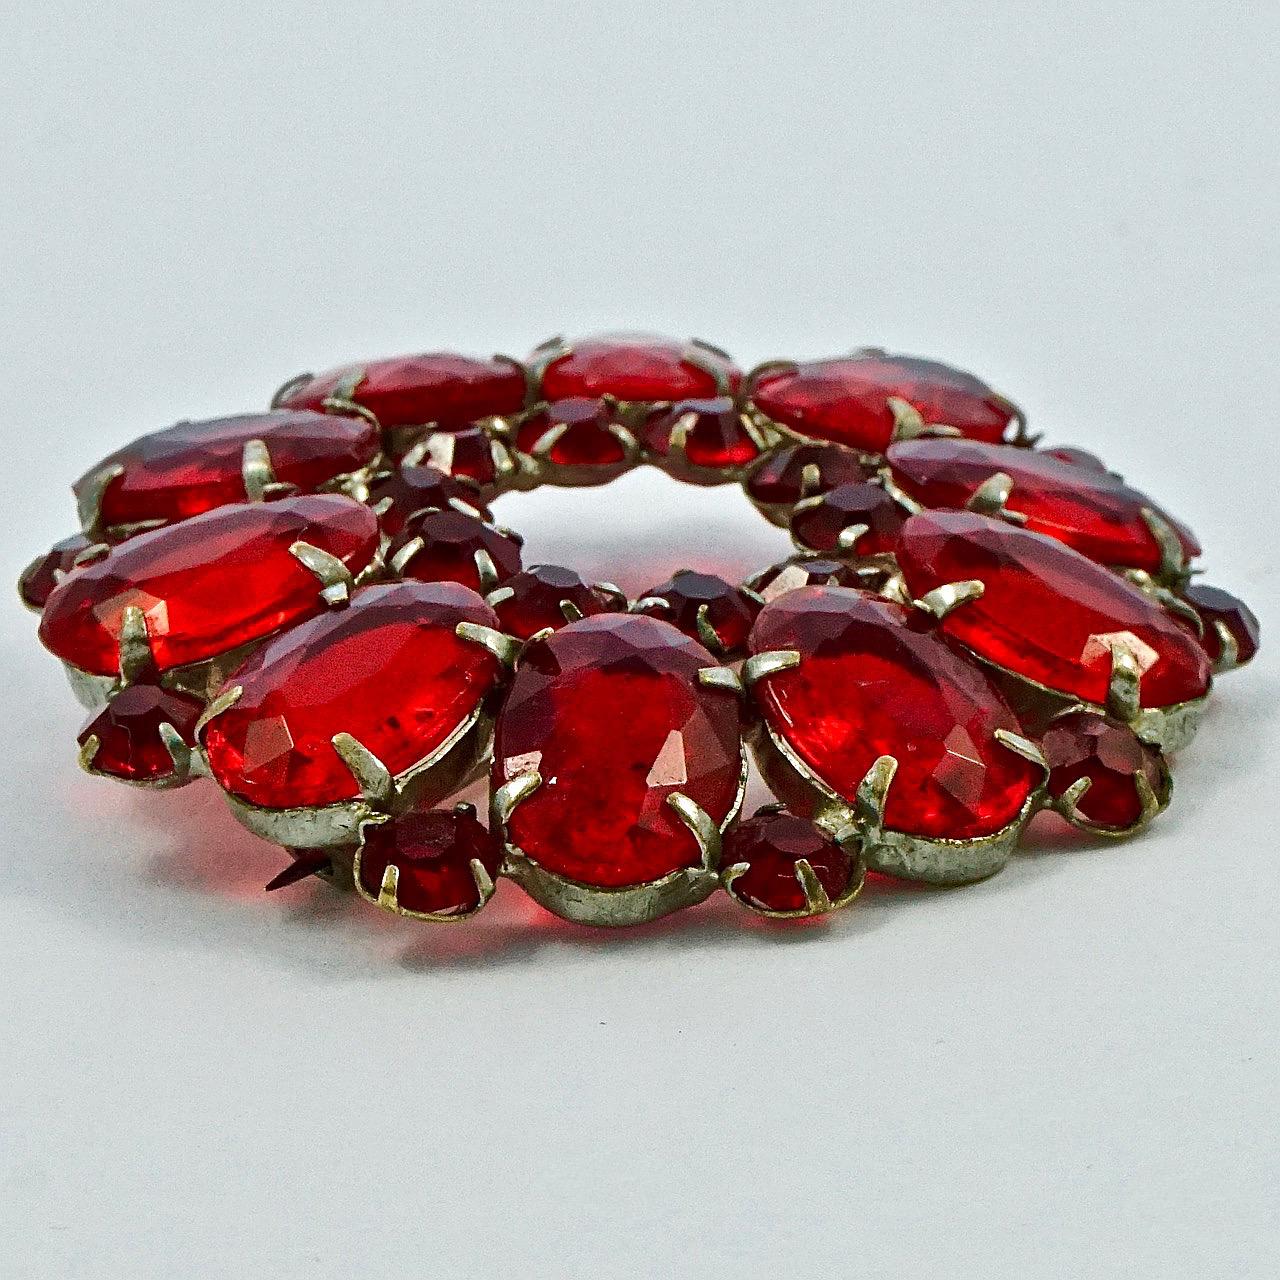 Antique Silver Plated Round Brooch with Faceted Red Glass Stones In Good Condition For Sale In London, GB